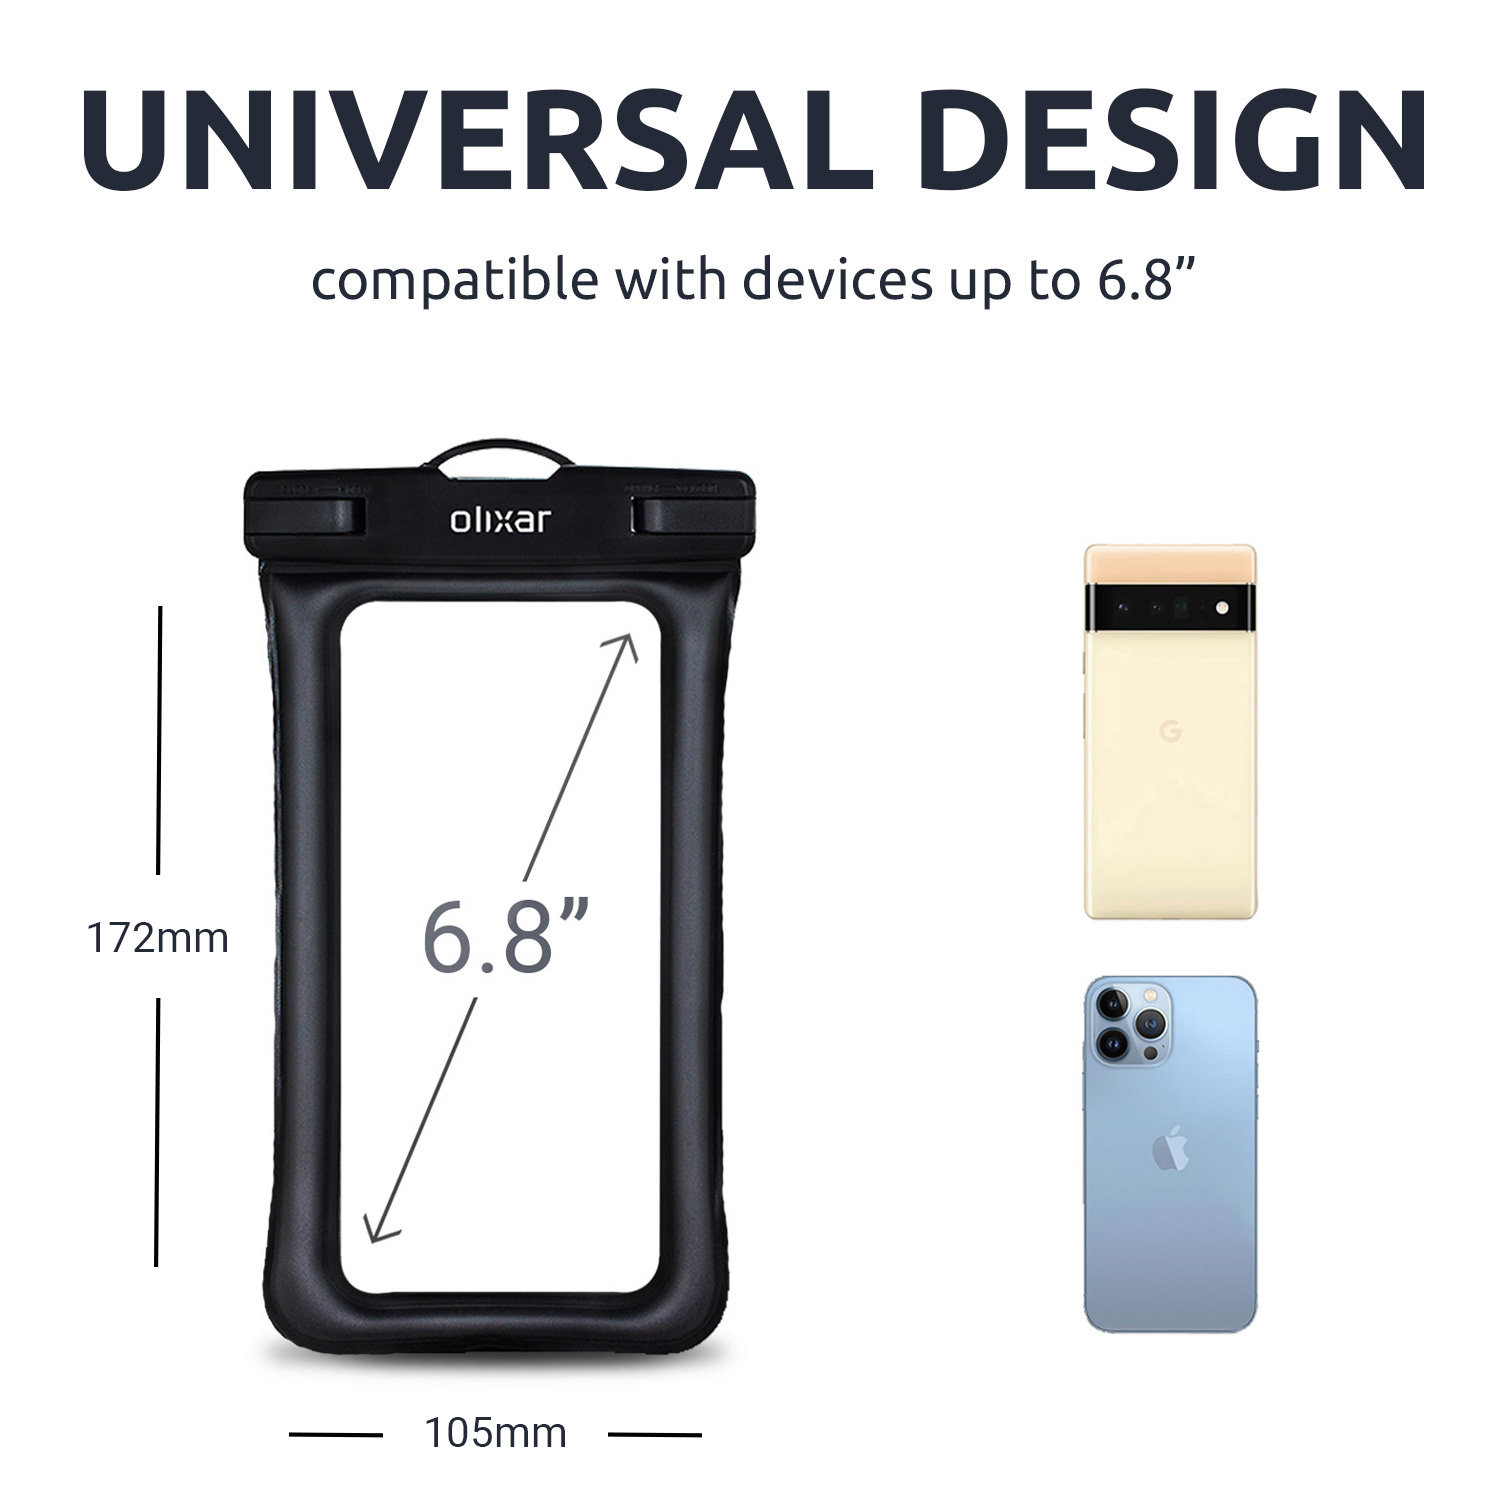 Detachable Lanyard Strap Black - for Smartphones up to 6.8 Universal Design Submersible Waterproof Pouch - Olixar for Samsung Galaxy S10 Plus Waterproof Phone Pouch 